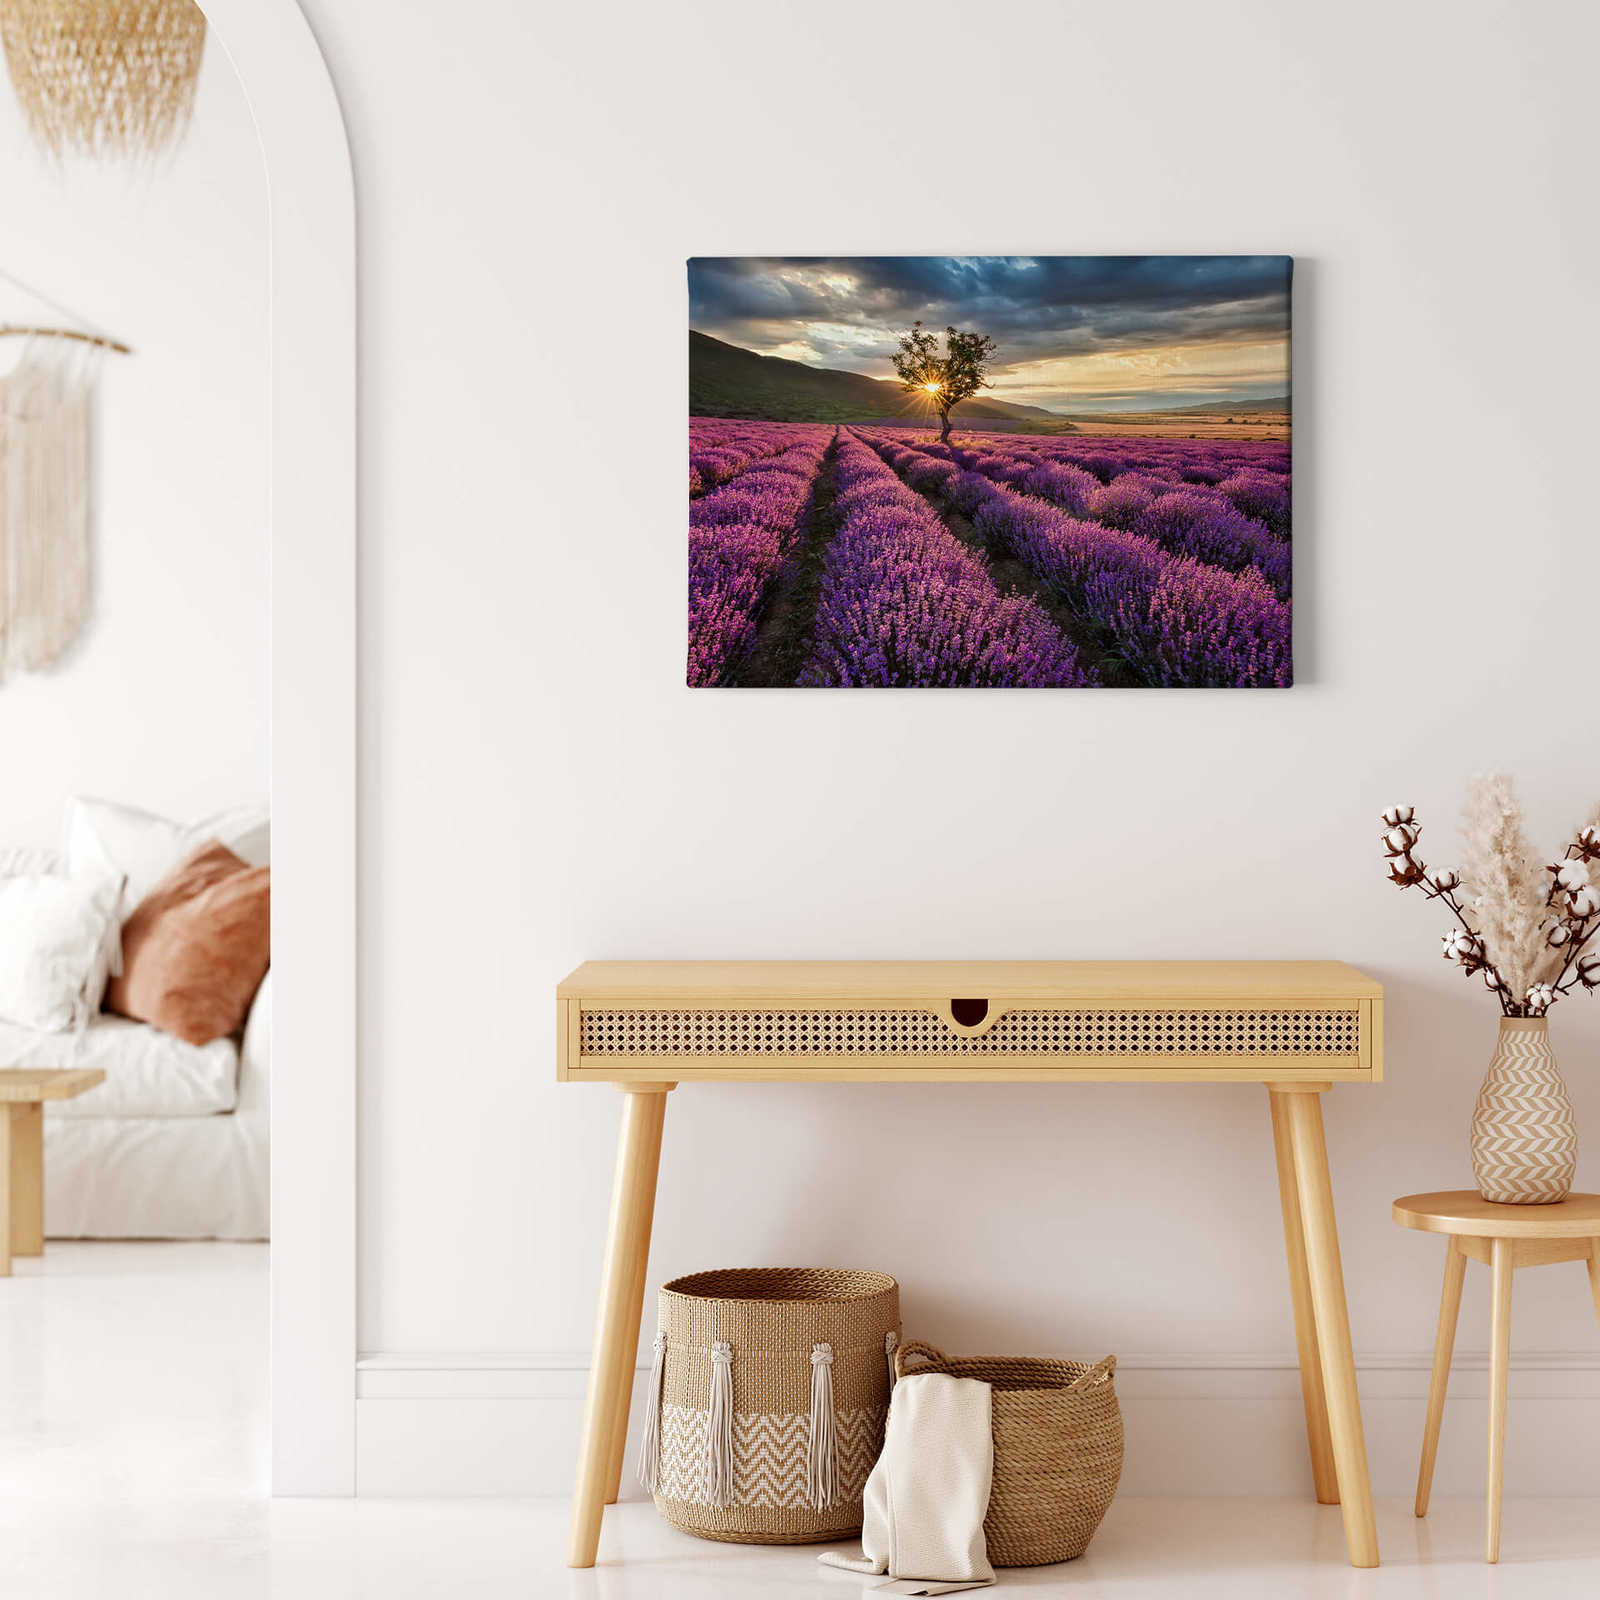             France canvas print lavender in Provence
        